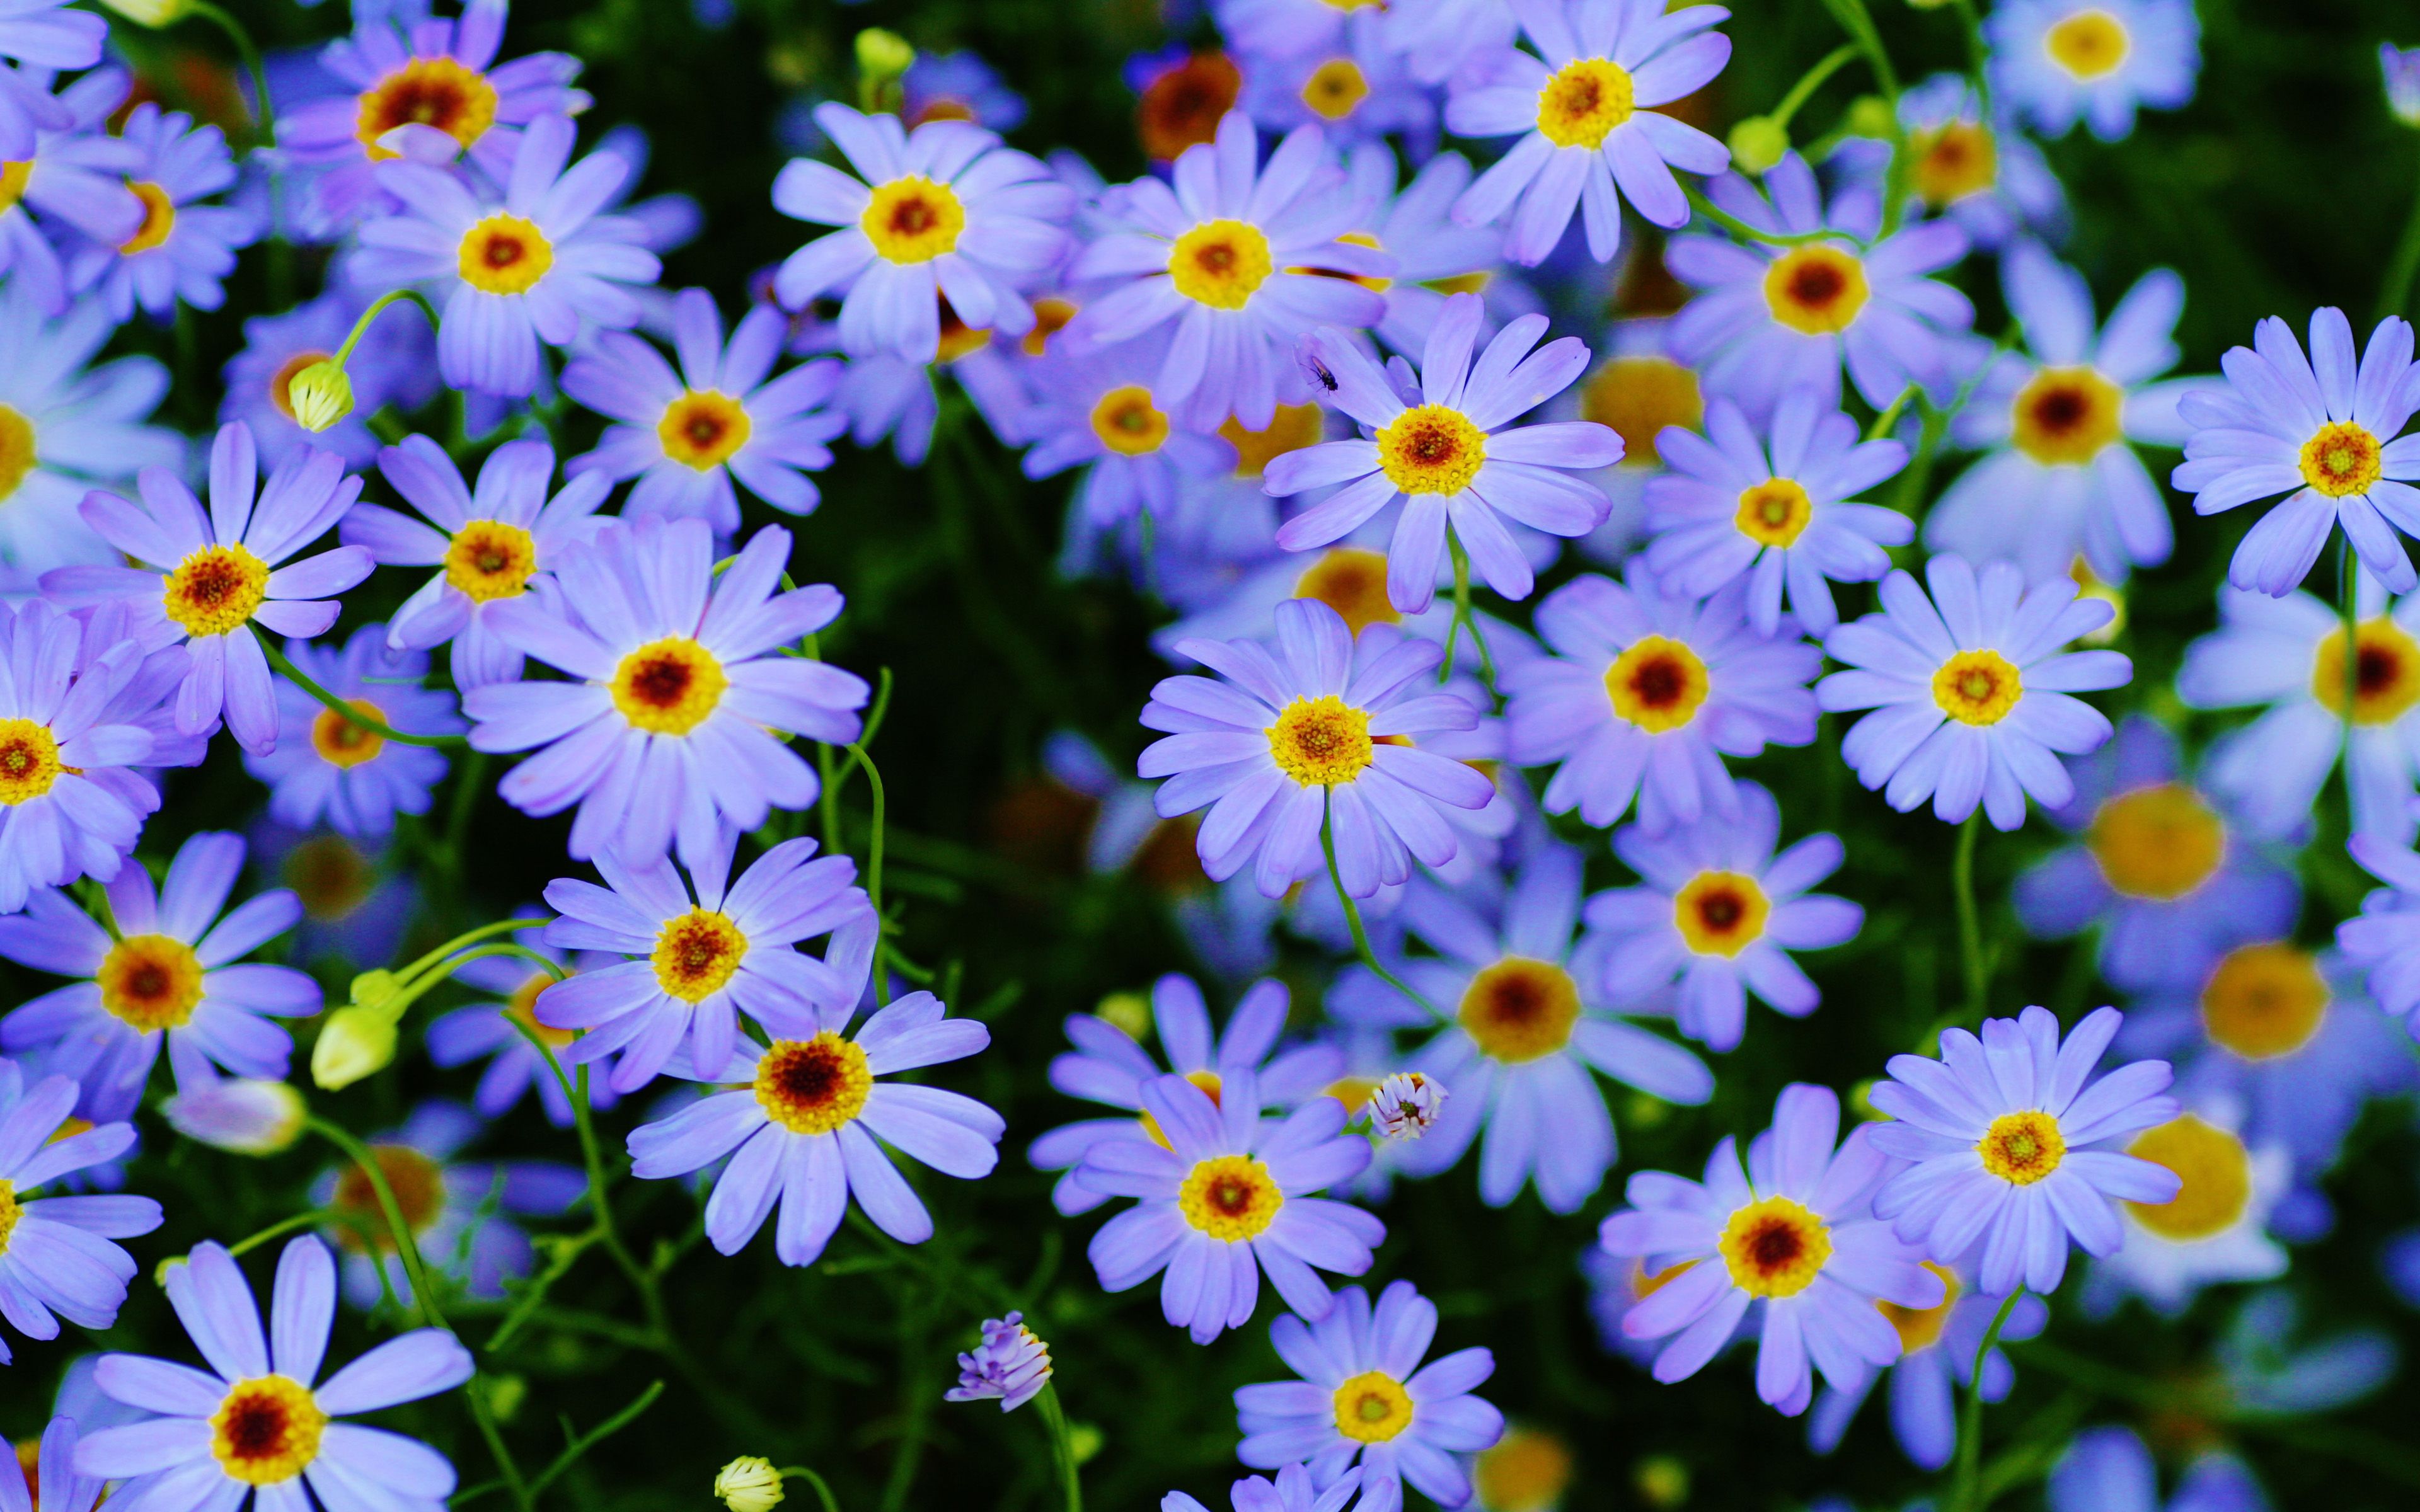 3840x2400 Marguerite Daisy Plants Blue Flowers Macro Photography Ultra Hd Wallpaper For Desktop Mobile Phones And Laptop 3840x2400